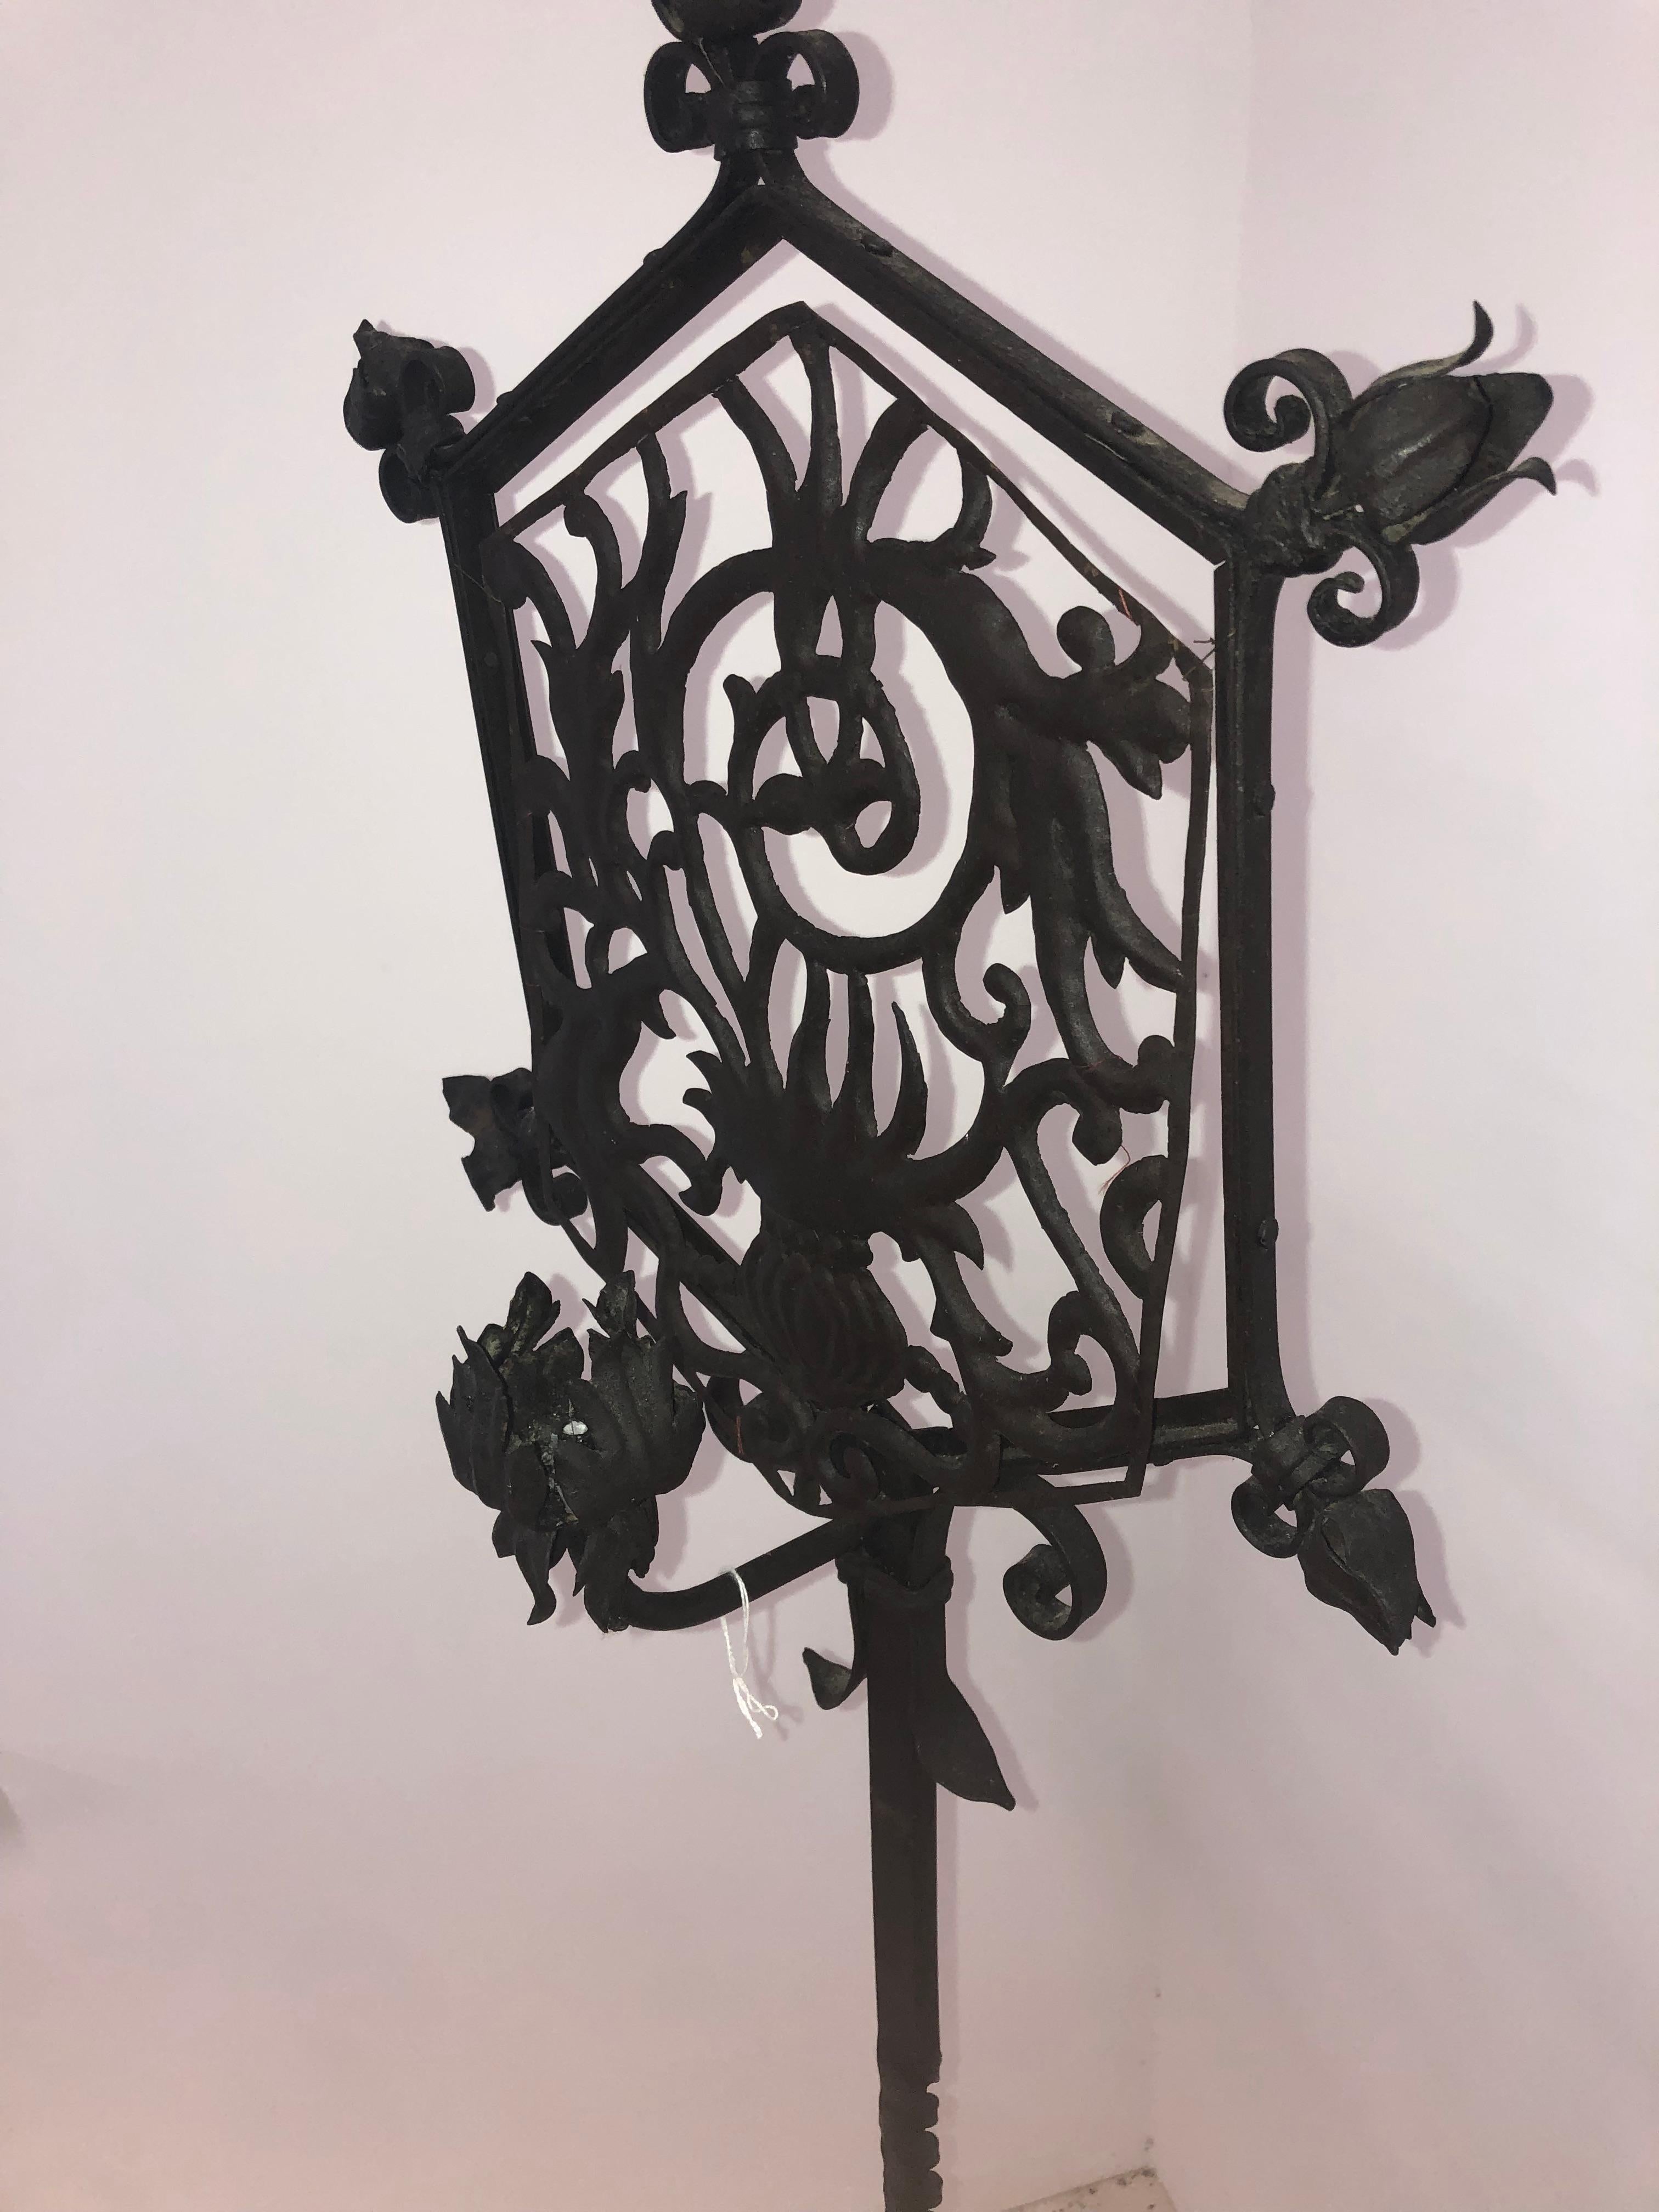 Gothic style floor lamp/candlestand from the 19th century.